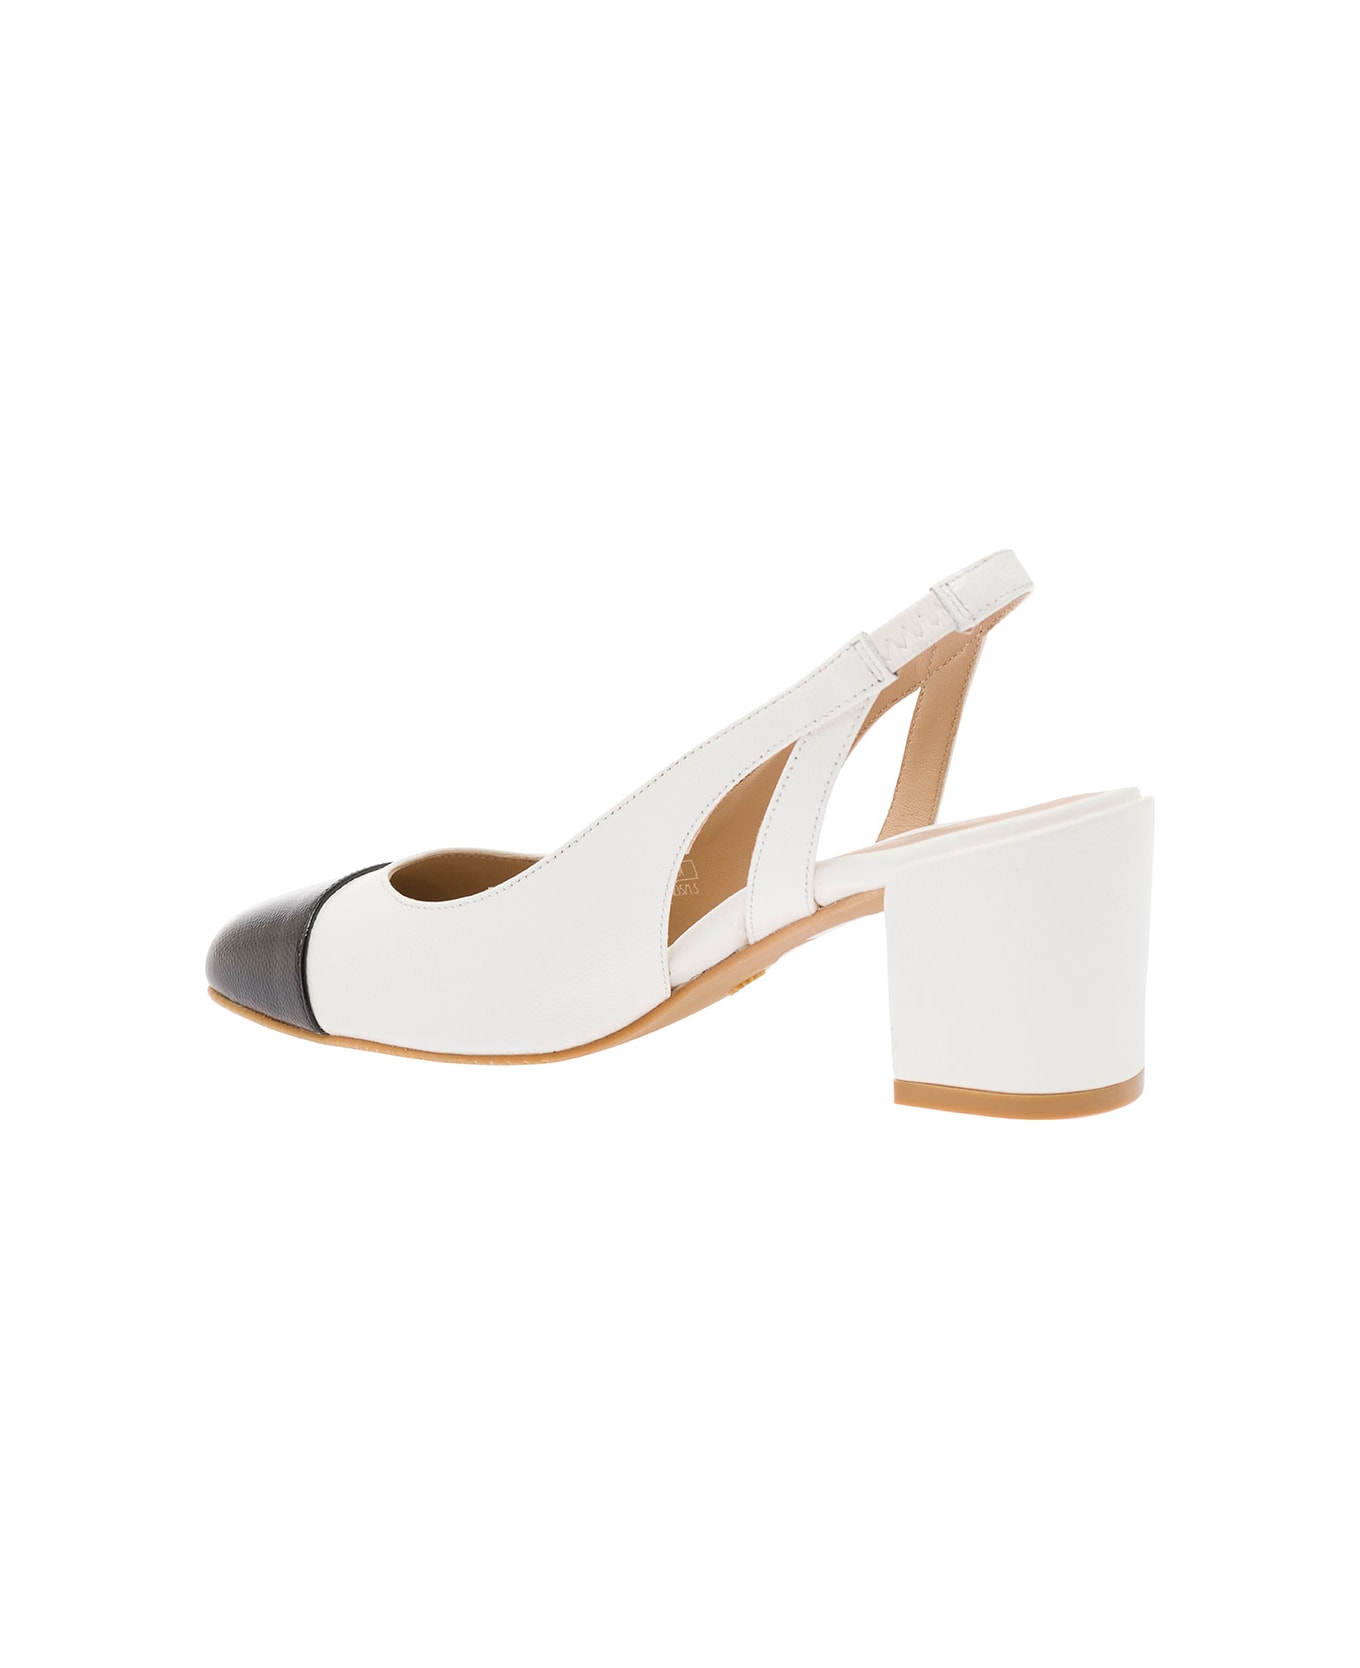 Stuart Weitzman White Slingback With Contrasting Toe In Smooth Leather Woman - White ハイヒール